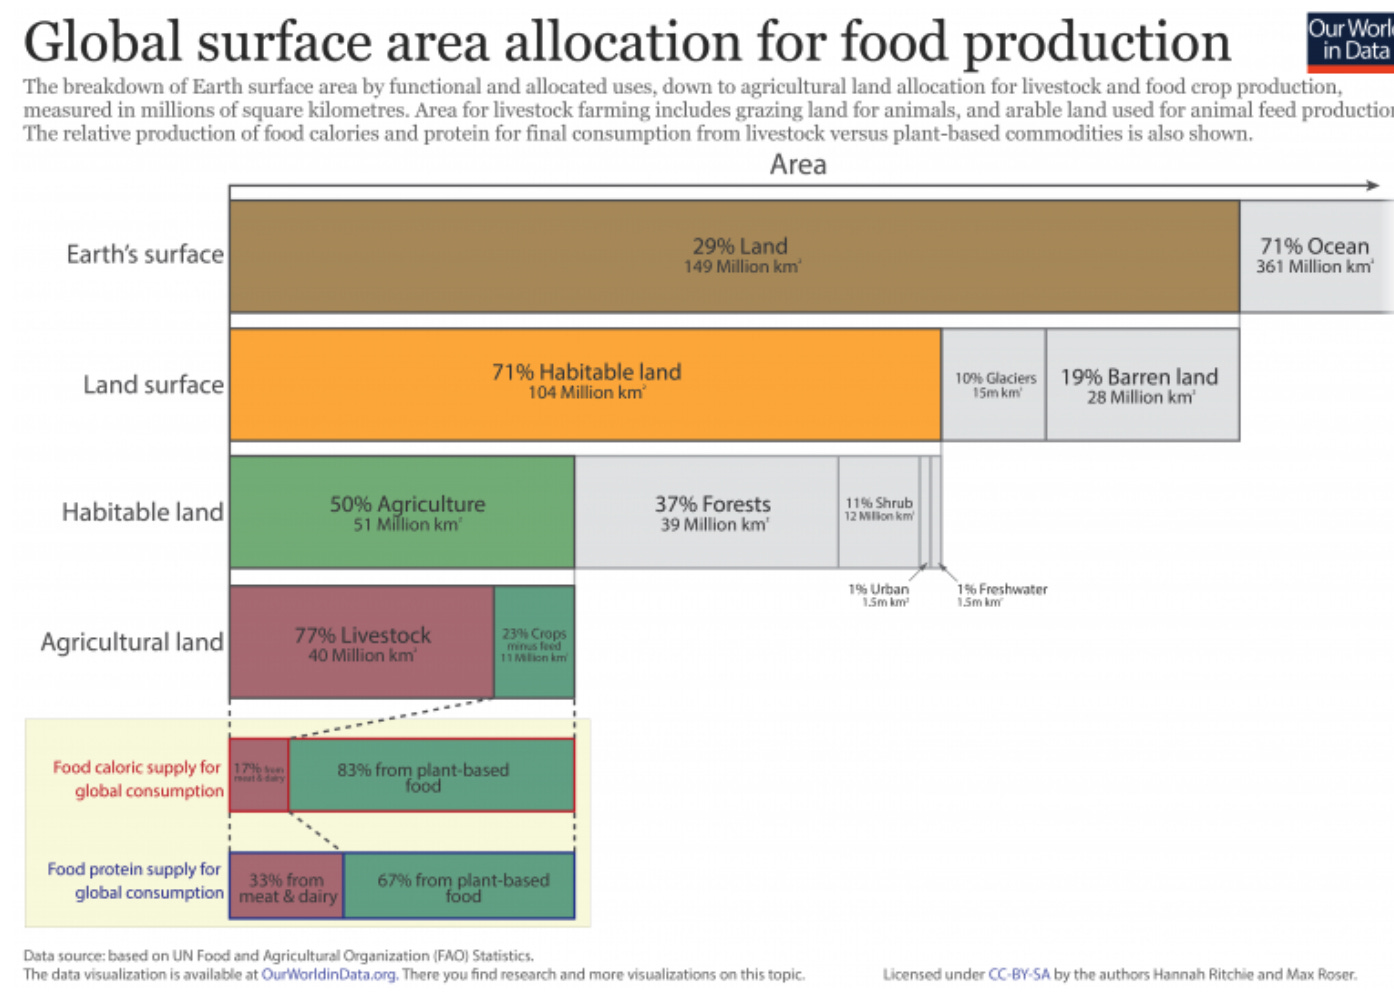 Global surface area allocation for food production, The Adaptive Economy, Djoann Fal